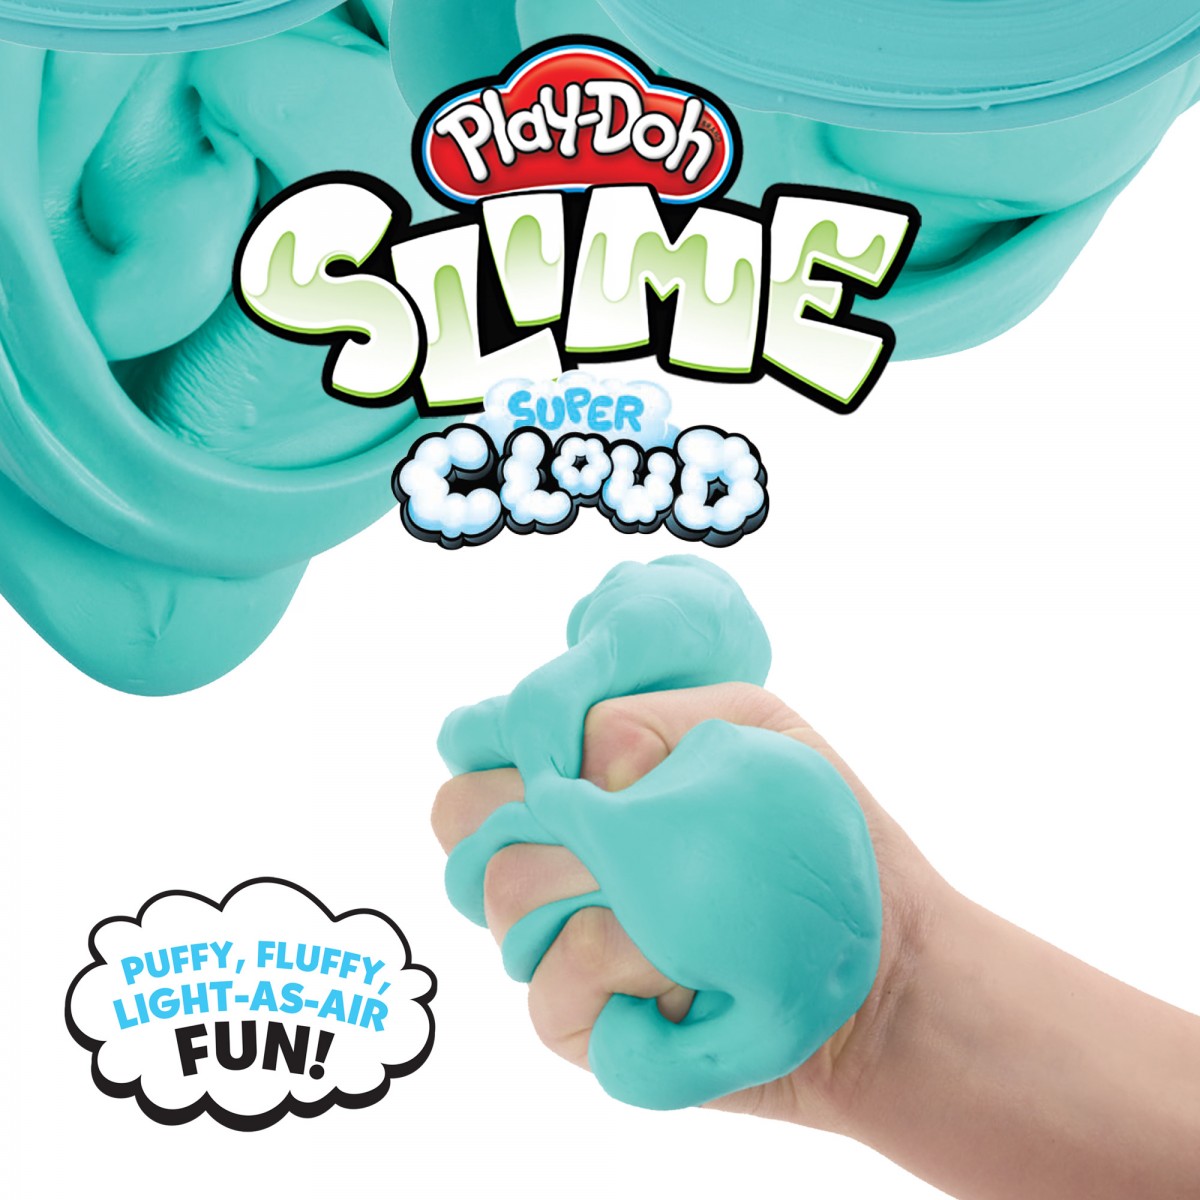 Play-Doh Super Cloud Single Can of Orange Fluffy Slime Compound Assorted, Sand, Slime & Others for Kids age 3Y+ 